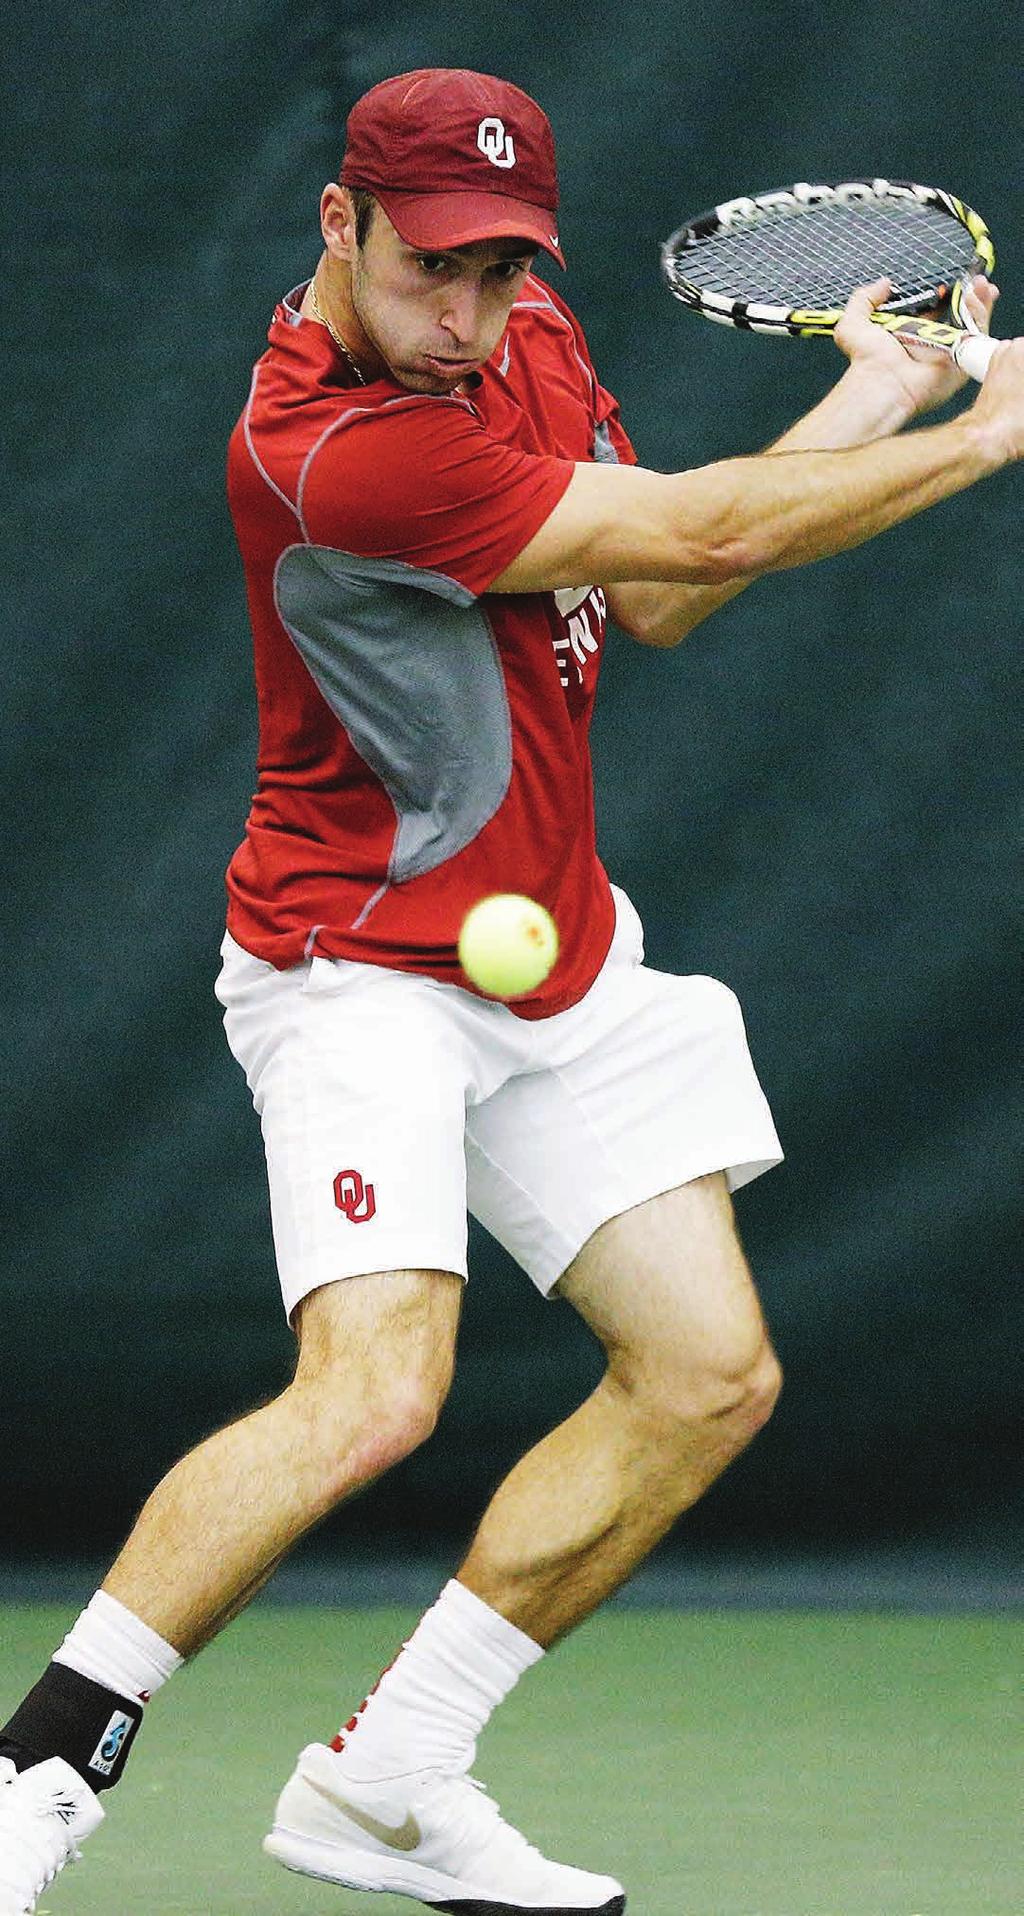 MEN S TENNIS PREVIEW The Oklahoma Sooners men s tennis claimed its first national indoor championship in the 2015 ITA Men s Team National Indoor Championship with a 4-2 victory against the No.